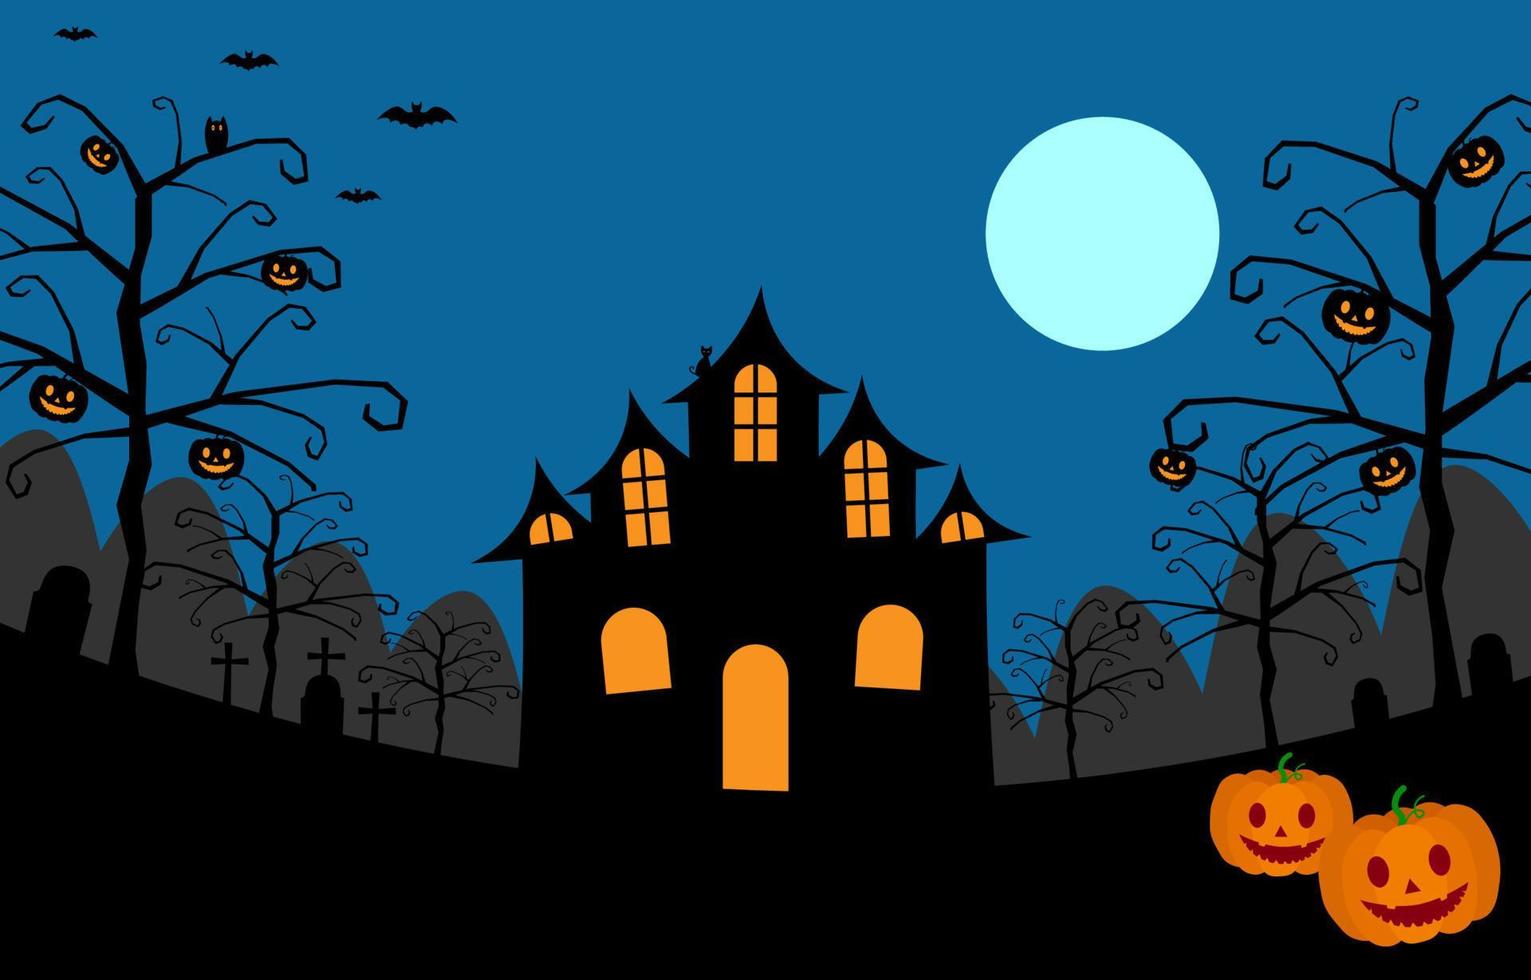 Halloween night background with scary pumpkins, dark castle, tombstones, crosses, spooky trees, owl, black cat, flying bat and full moon on blue background. Vector illustration Halloween day concept.